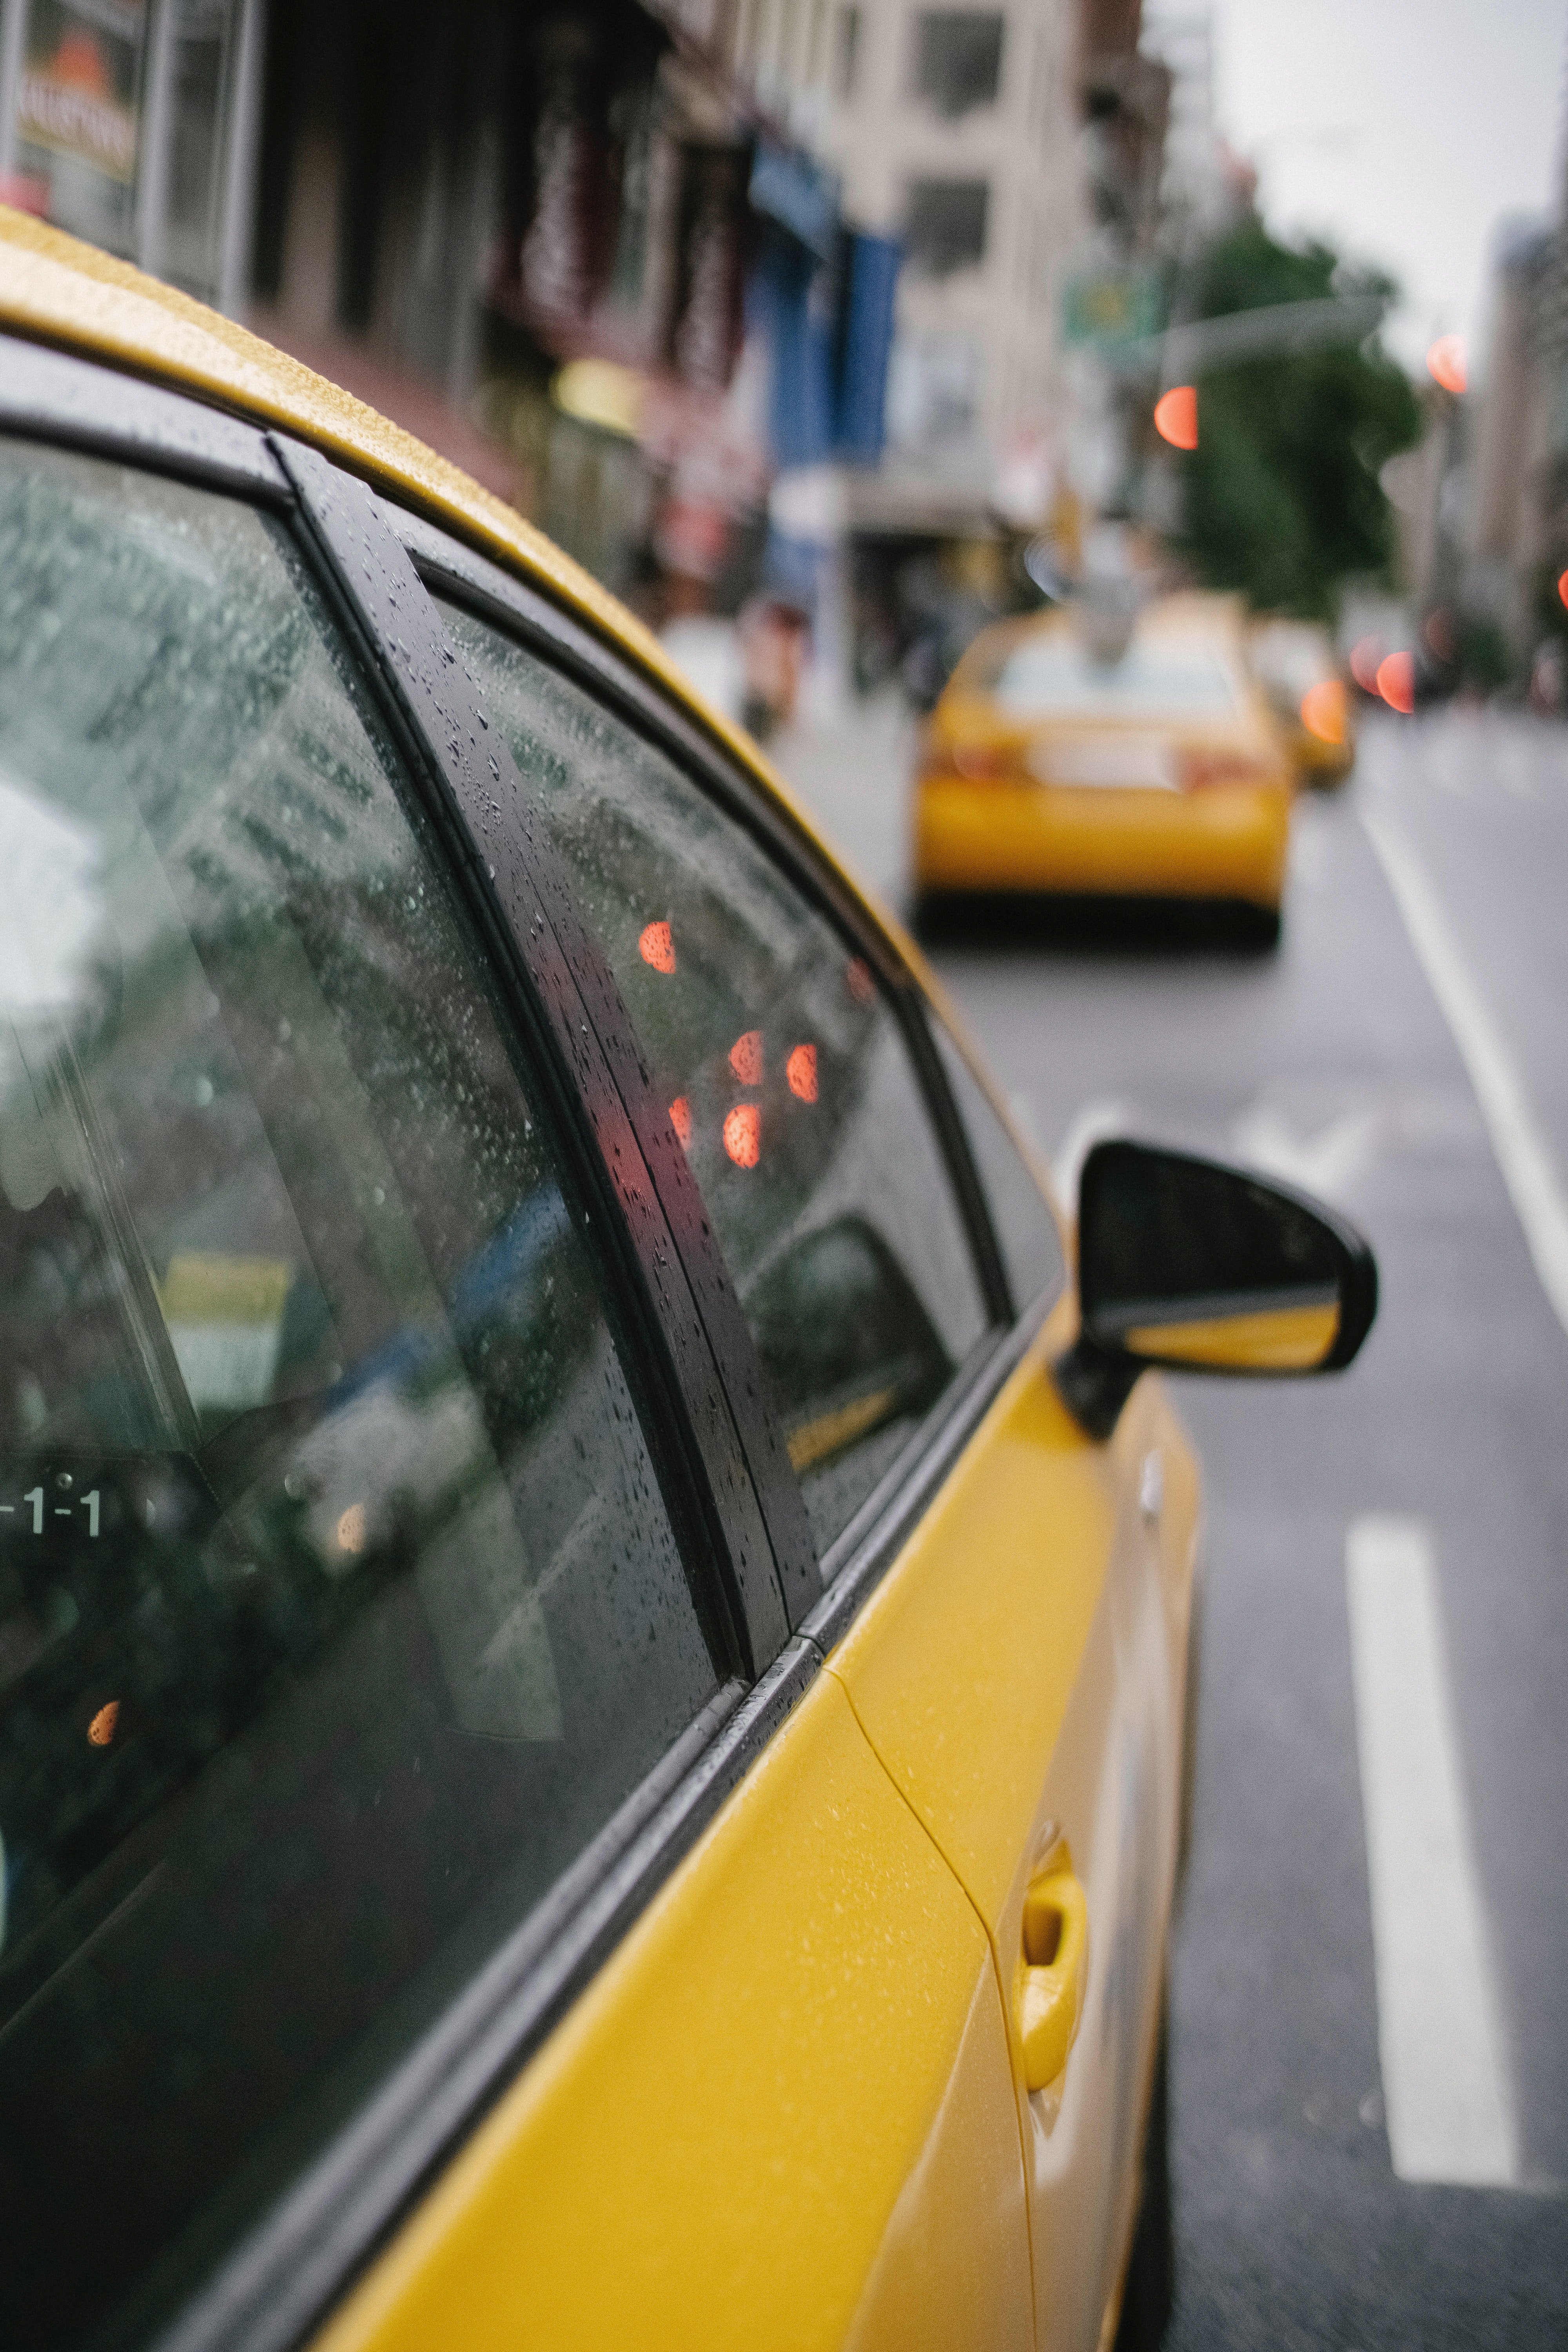 Jennifer took a cab to a nearby city to find a job. | Source: Shutterstock